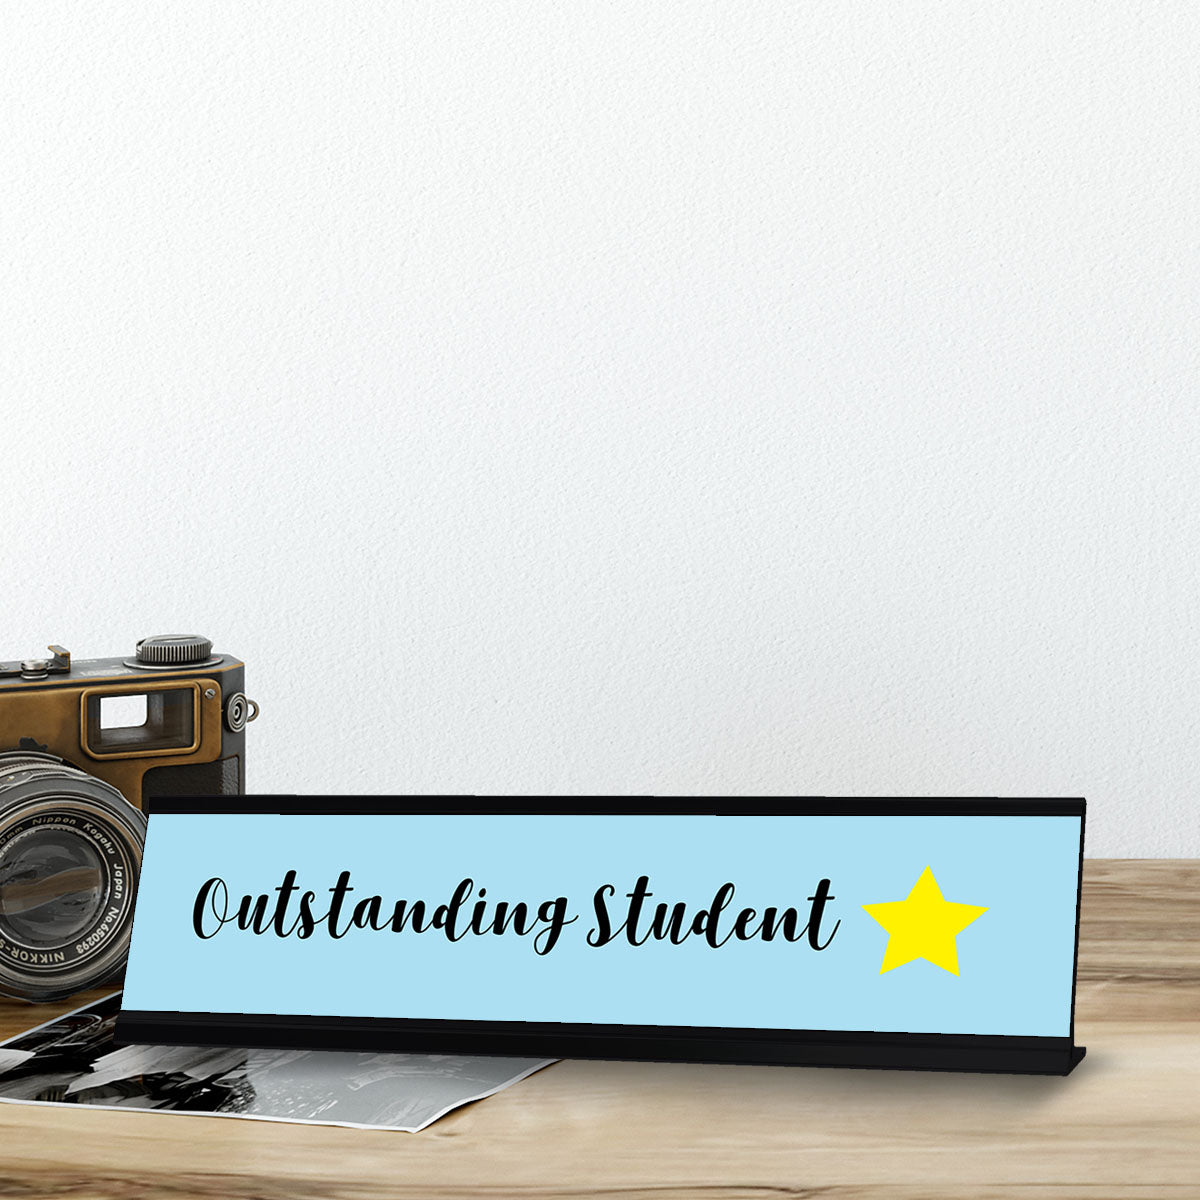 Outstanding Student, Student Award Desk Sign (2 x 8")